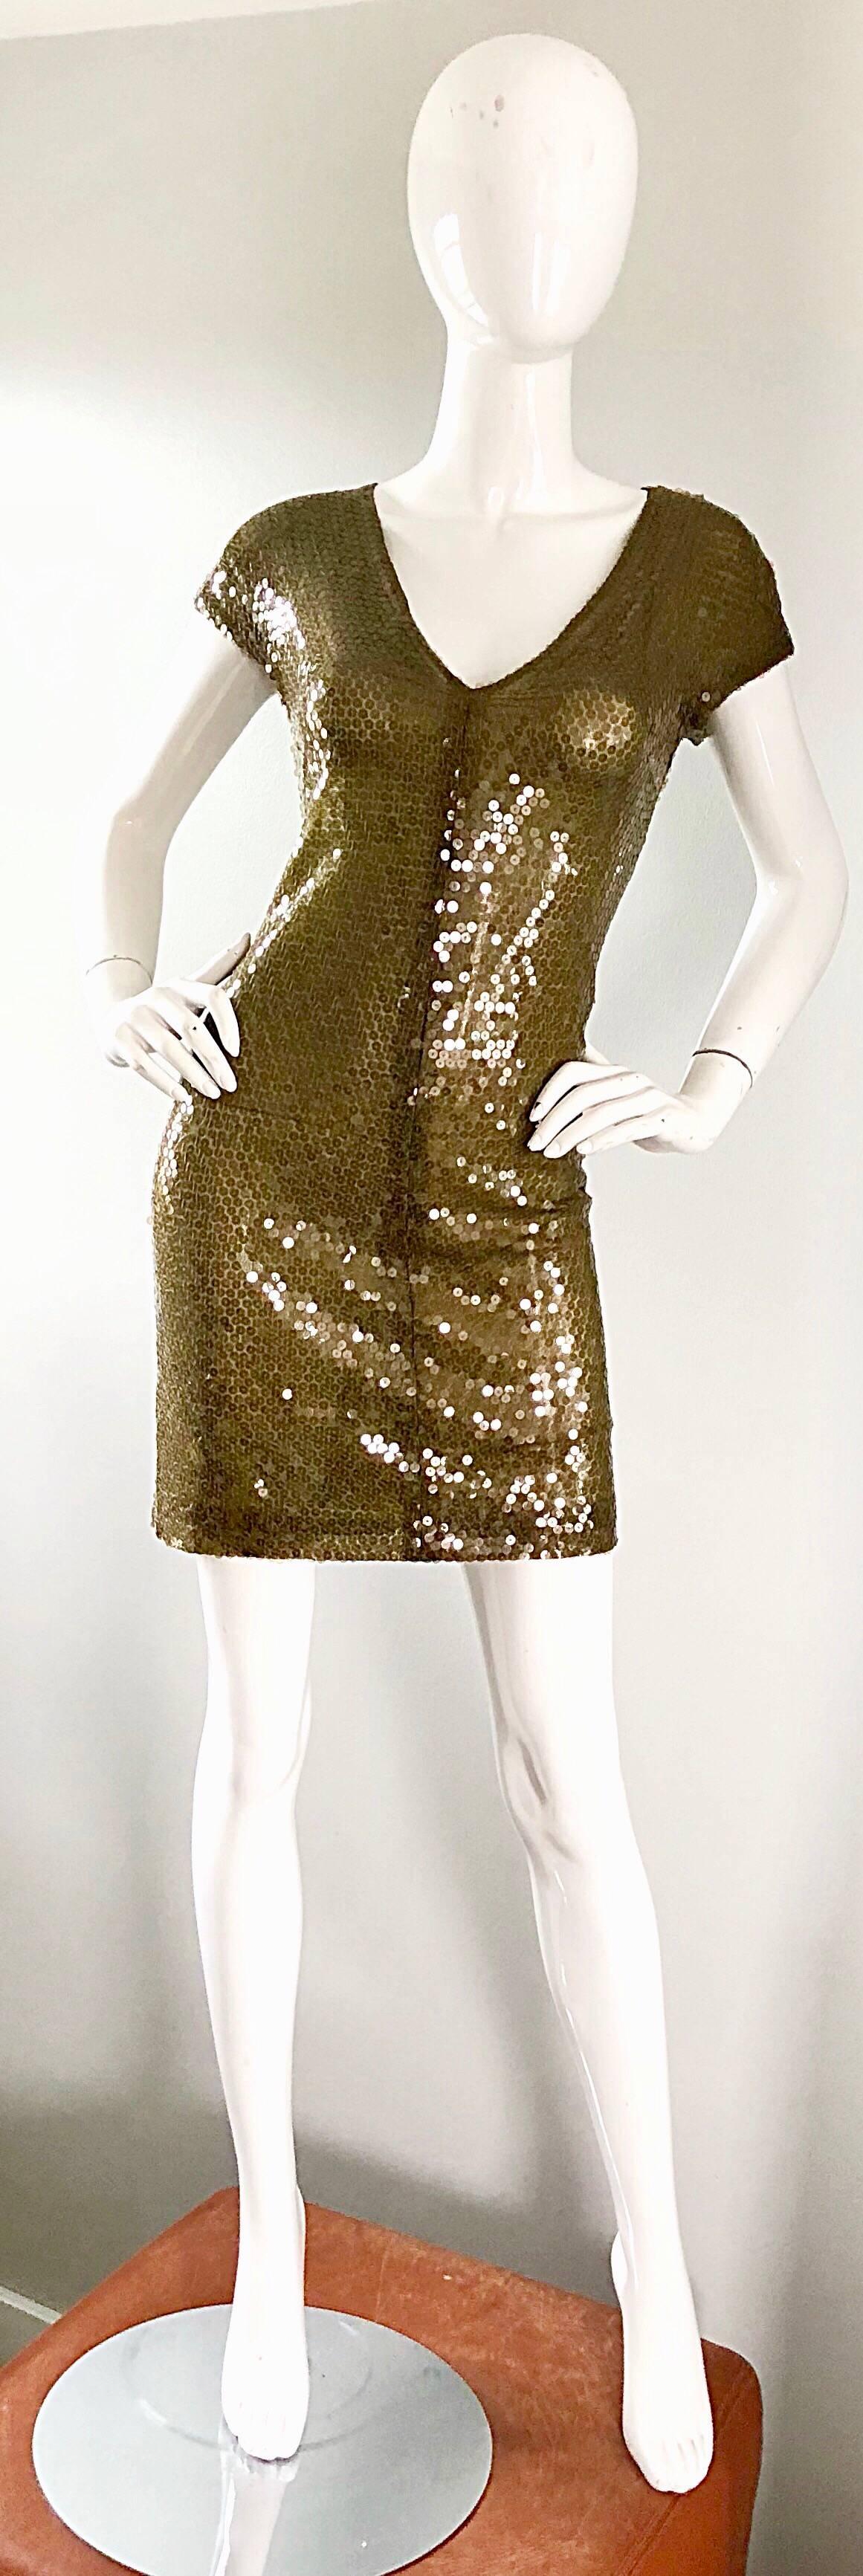 Sexy vintage early 1990s KRIZIA hunter green silk sequined semi sheer mini dress! Features thousands of hand-sewn deep green sequins on double layered silk net. Simply slips over the head, and stretches to fit. Can easily be dressed up or down, and